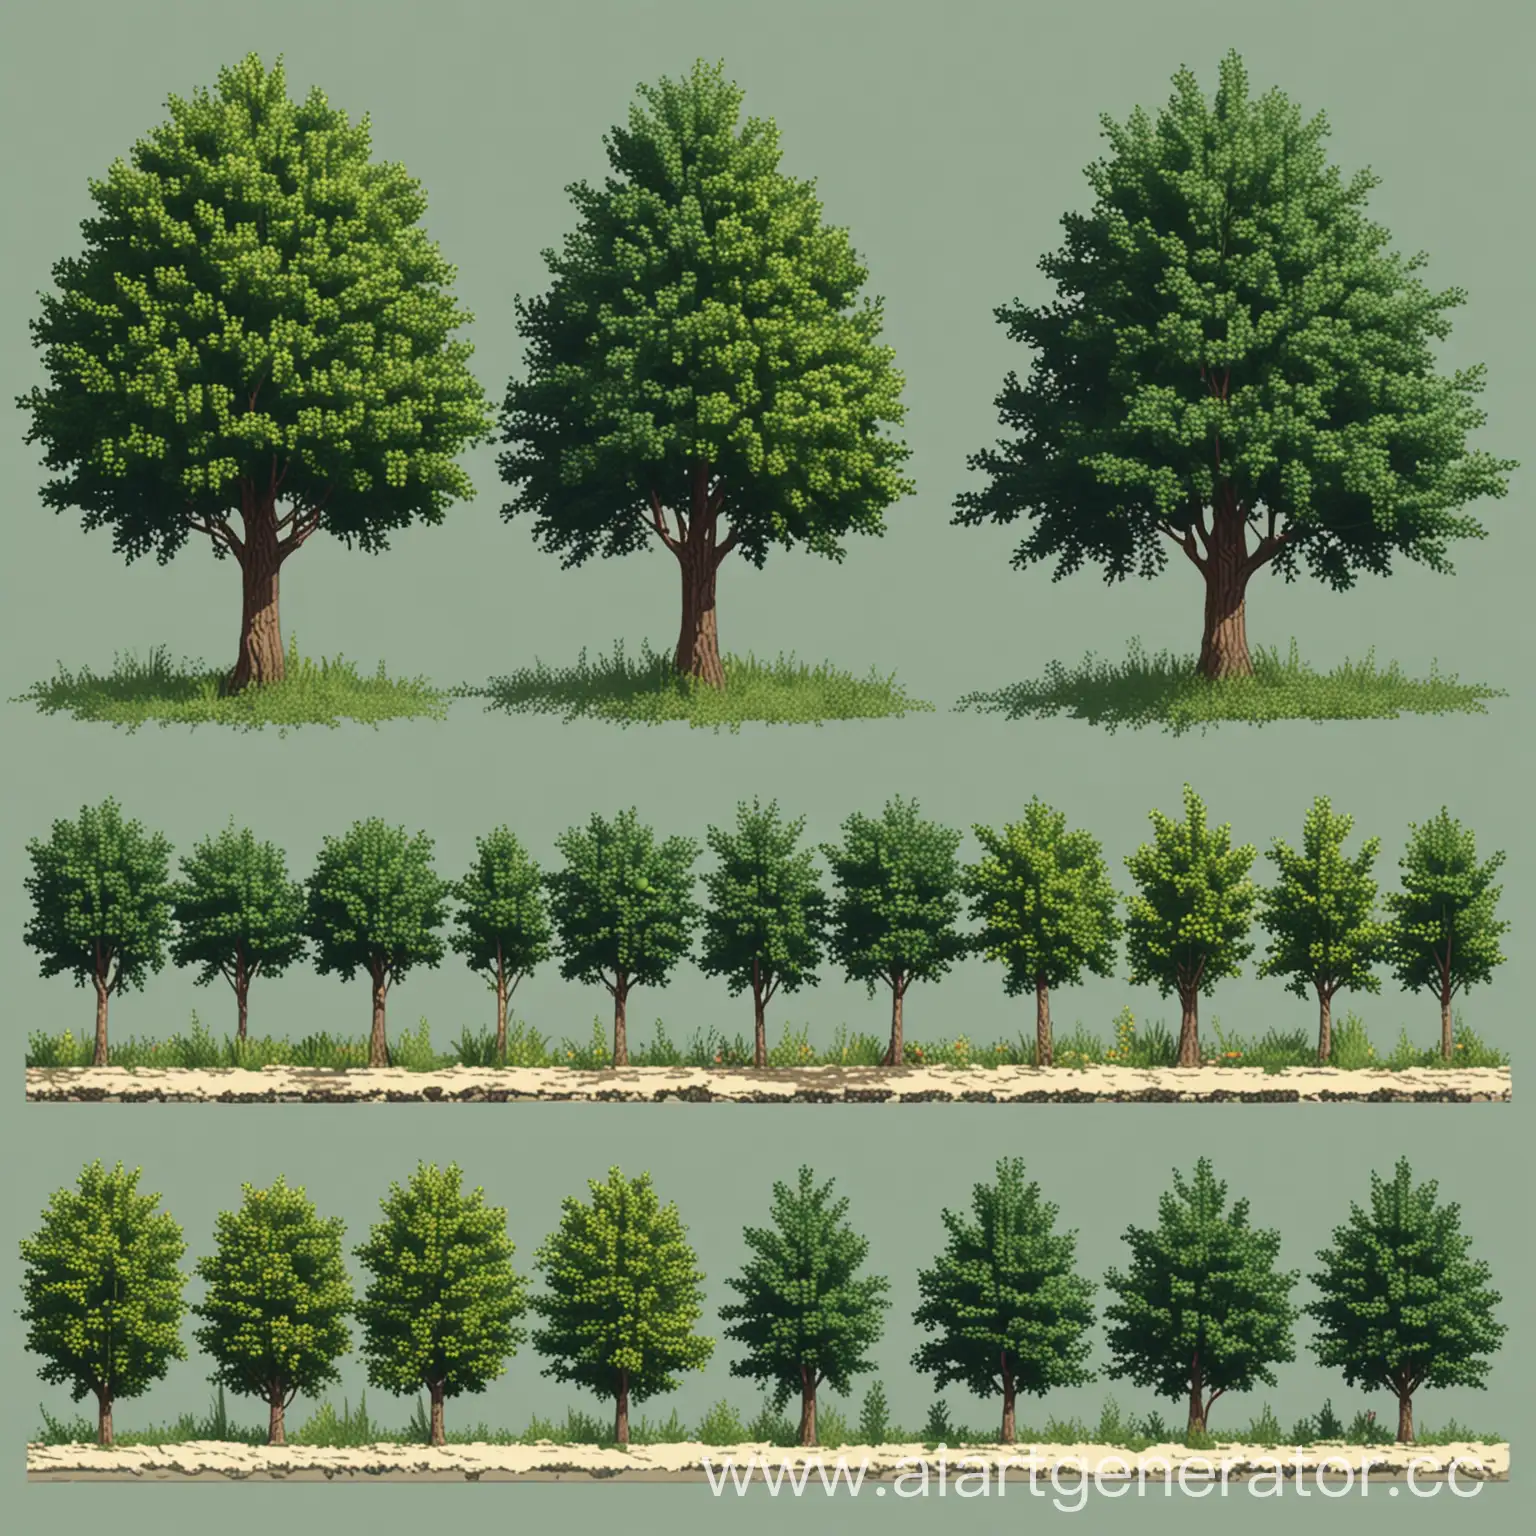 Bushes-and-Trees-Pixel-Art-Side-View-Landscape